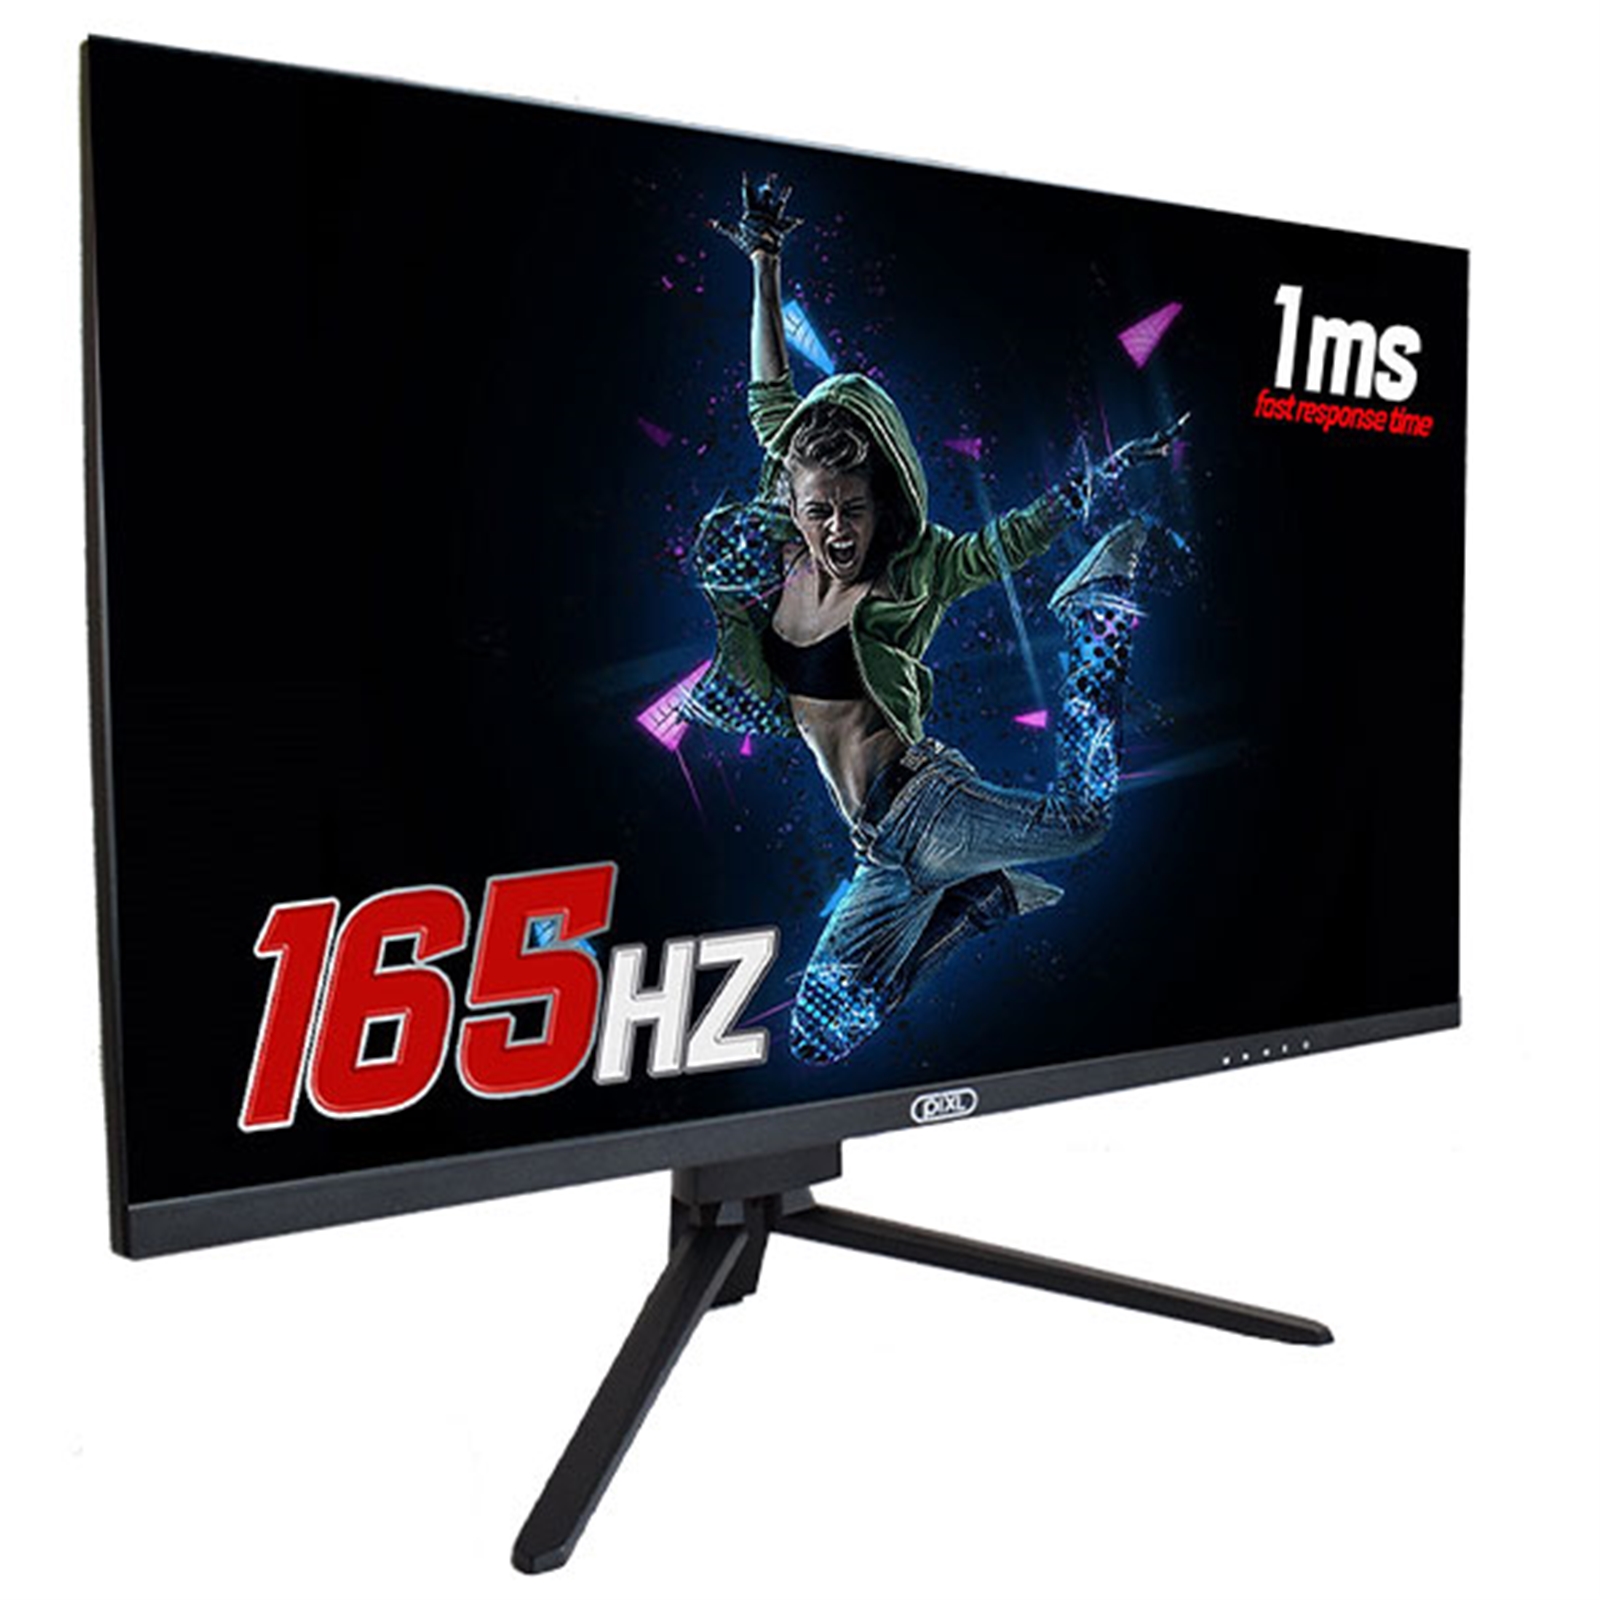 piXL CM24F10 24 Inch Frameless Gaming Monitor, Widescreen LCD Panel, Full HD 1920x1080, 1ms Response Time, 165Hz Refresh, Display Port / HDMI, 16.7 Million Colour Support, VESA Wall Mount, Black Finish